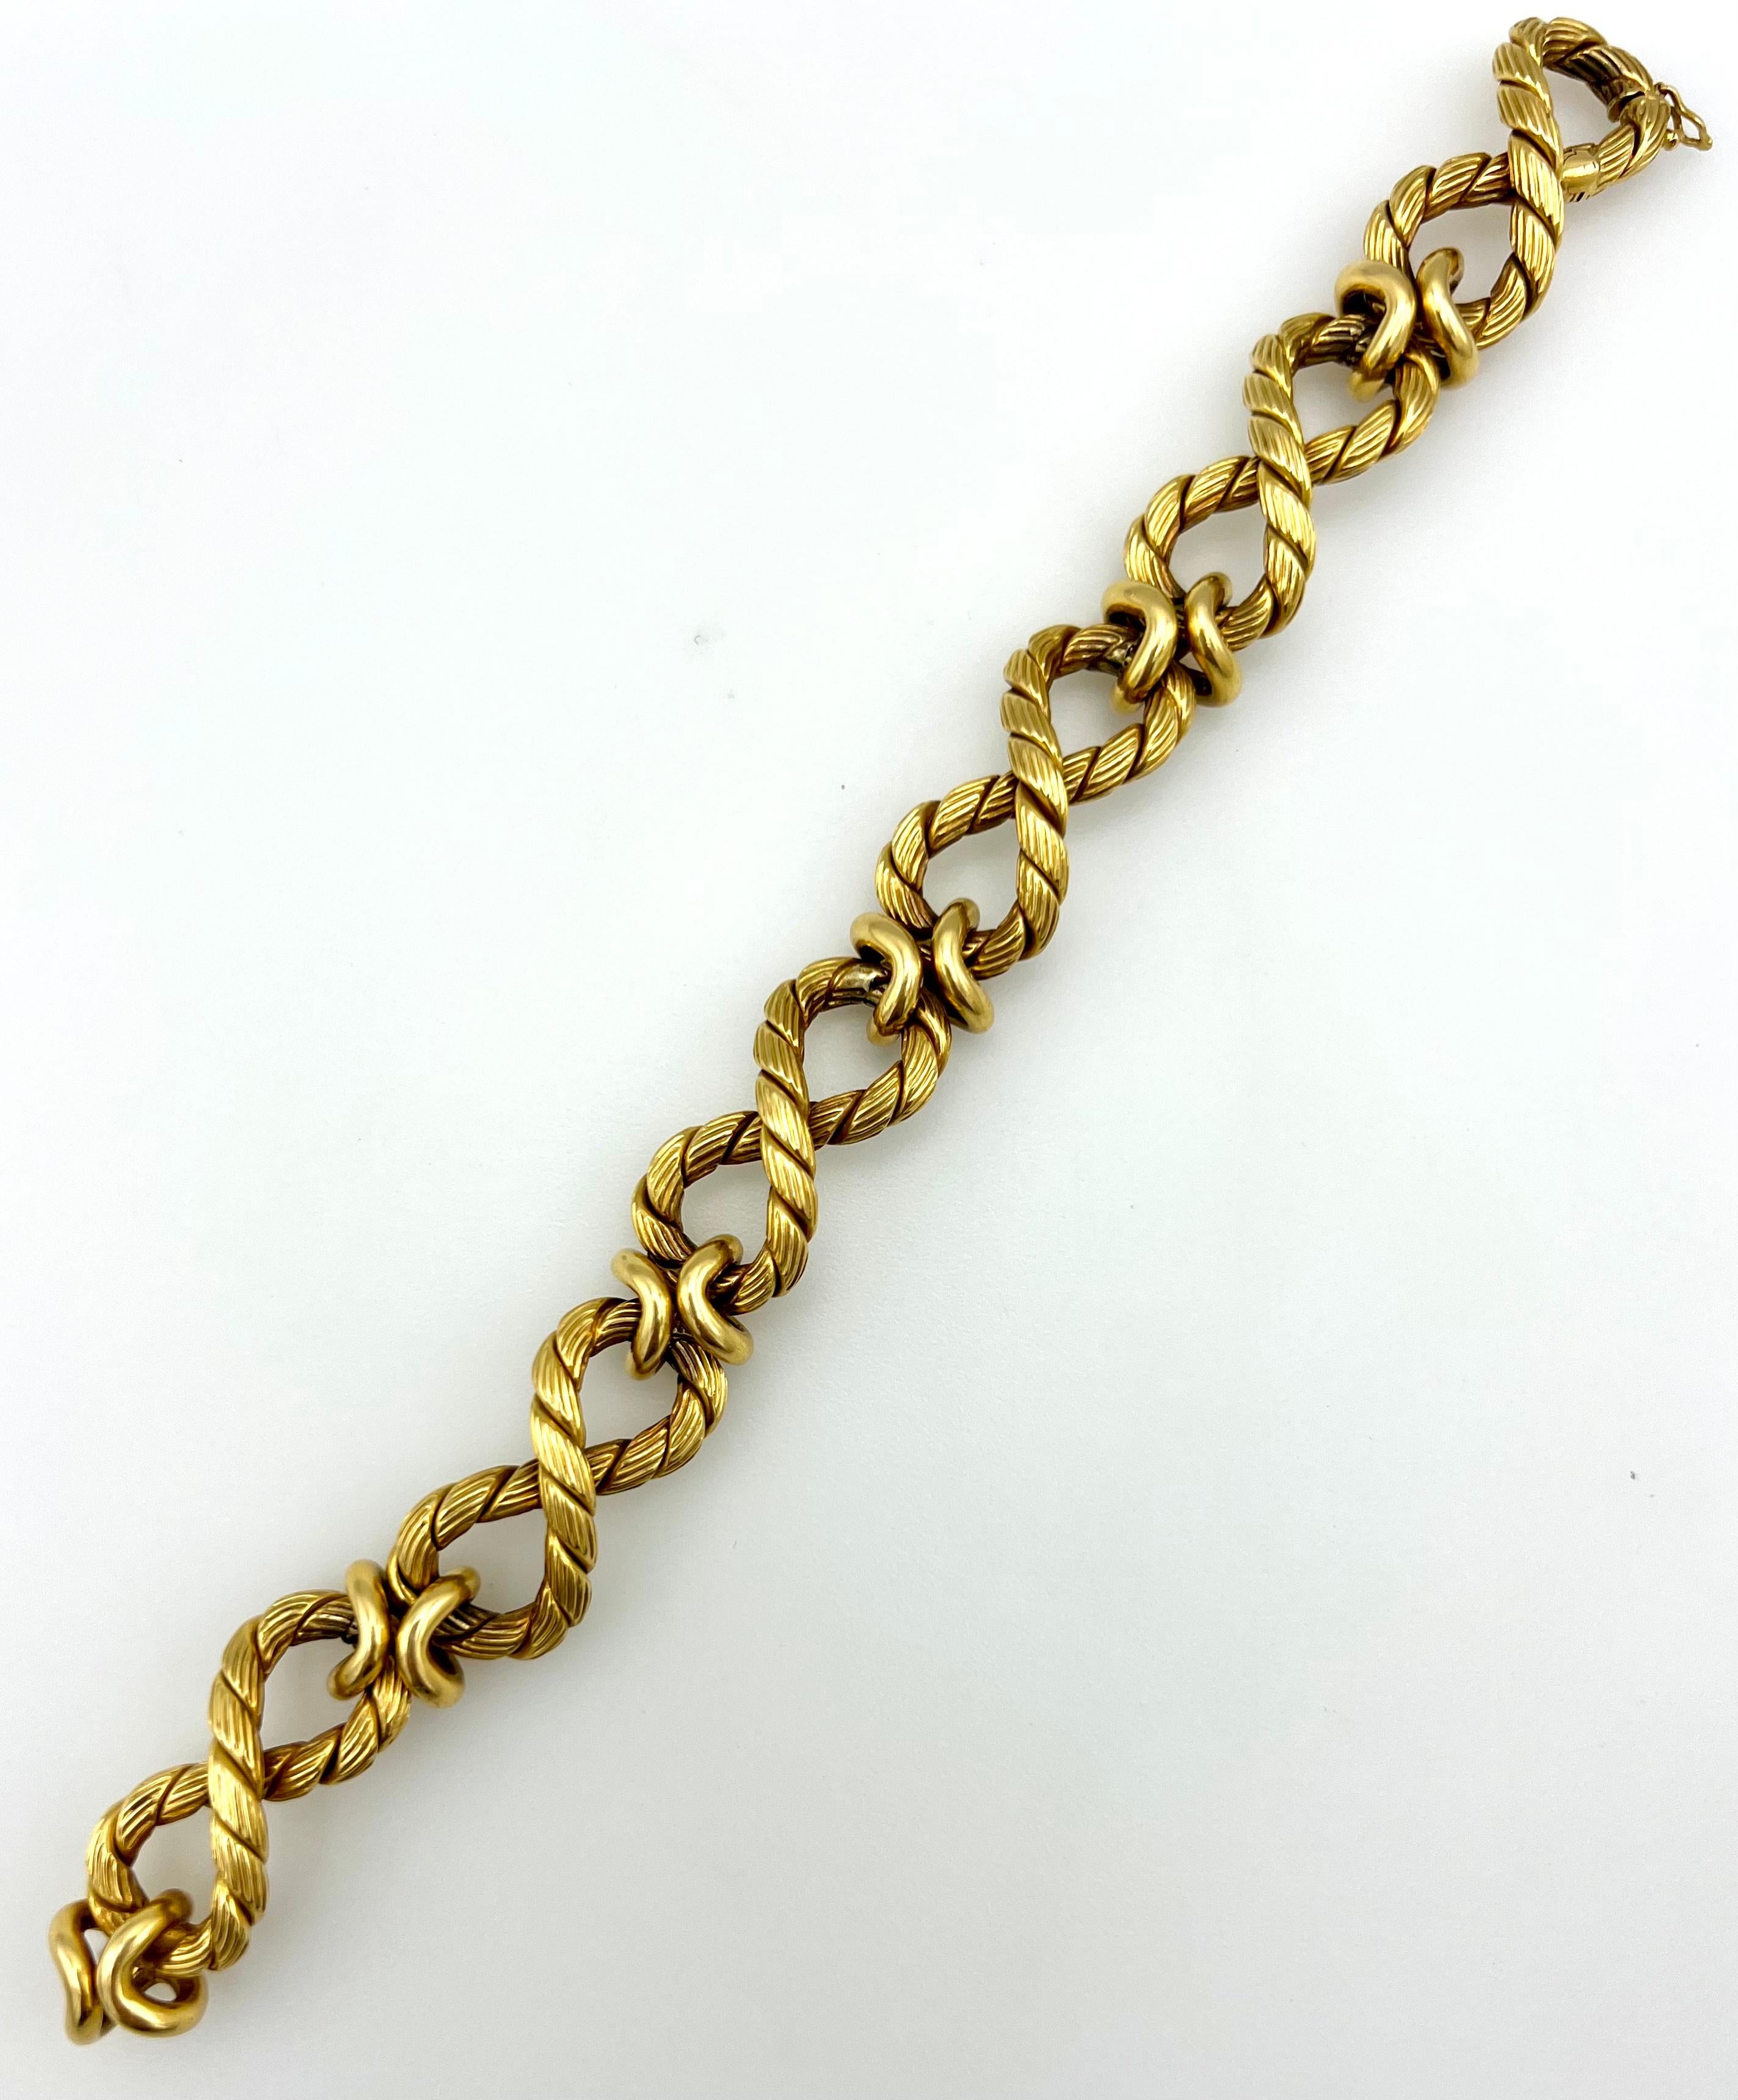 - 18 karat yellow gold
- Featuring infinity & X links 
- Rope, nautical motif
- Figure eight safety closure

Hallmarks: Italy, 18K, 15VK or VR
Total weight: 38.5 grams
Measurements: 7” long and 1/2” wide